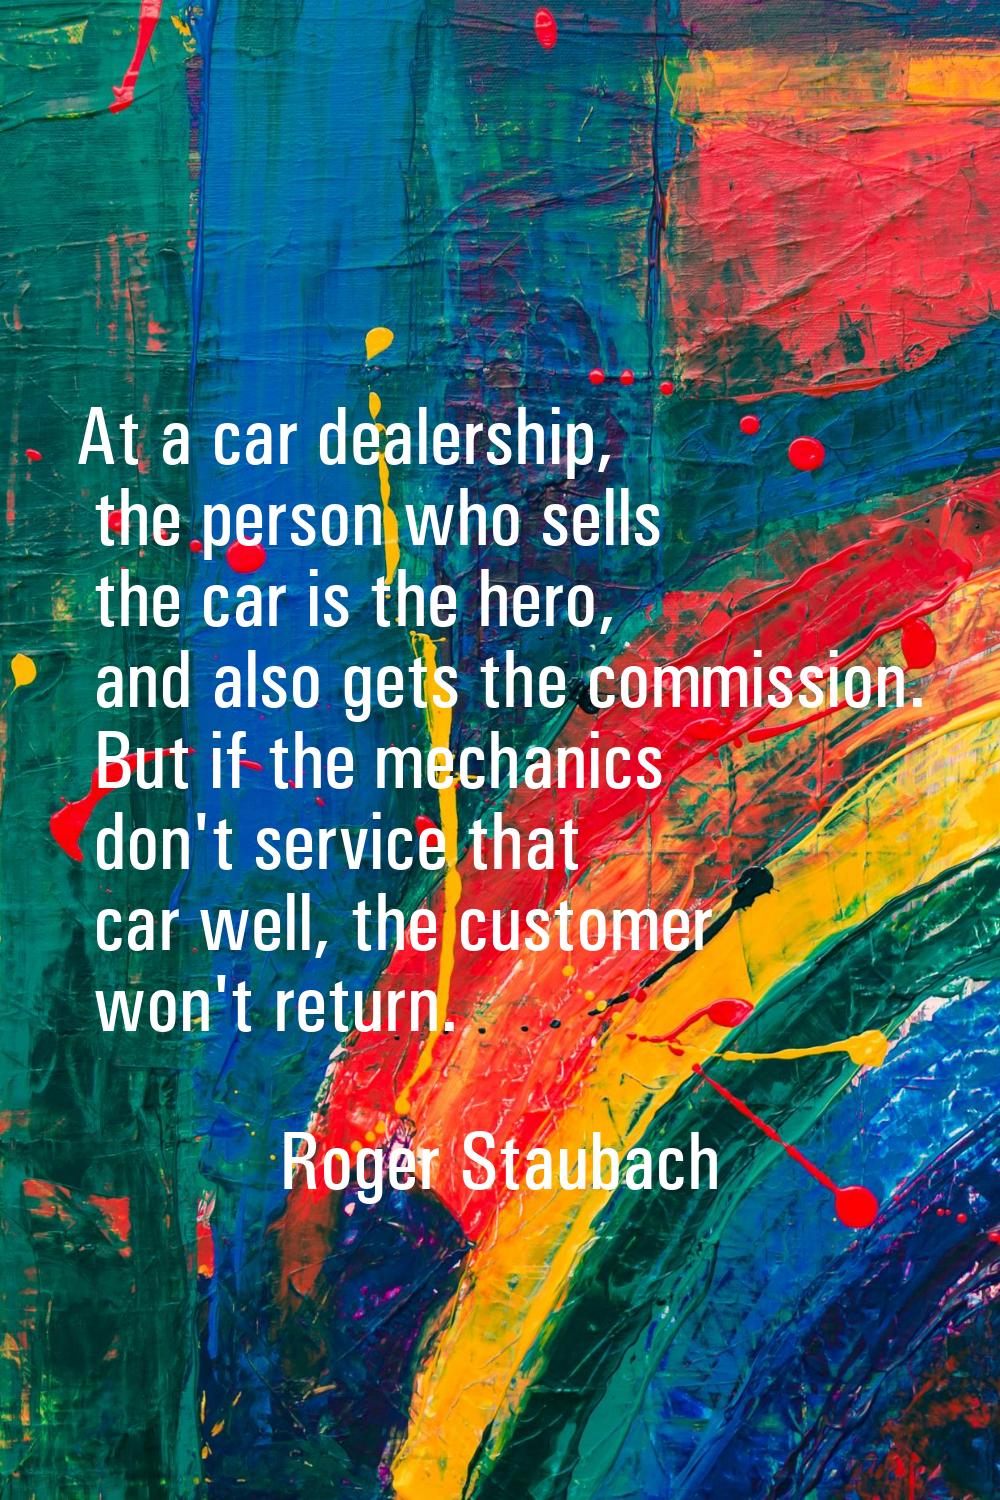 At a car dealership, the person who sells the car is the hero, and also gets the commission. But if